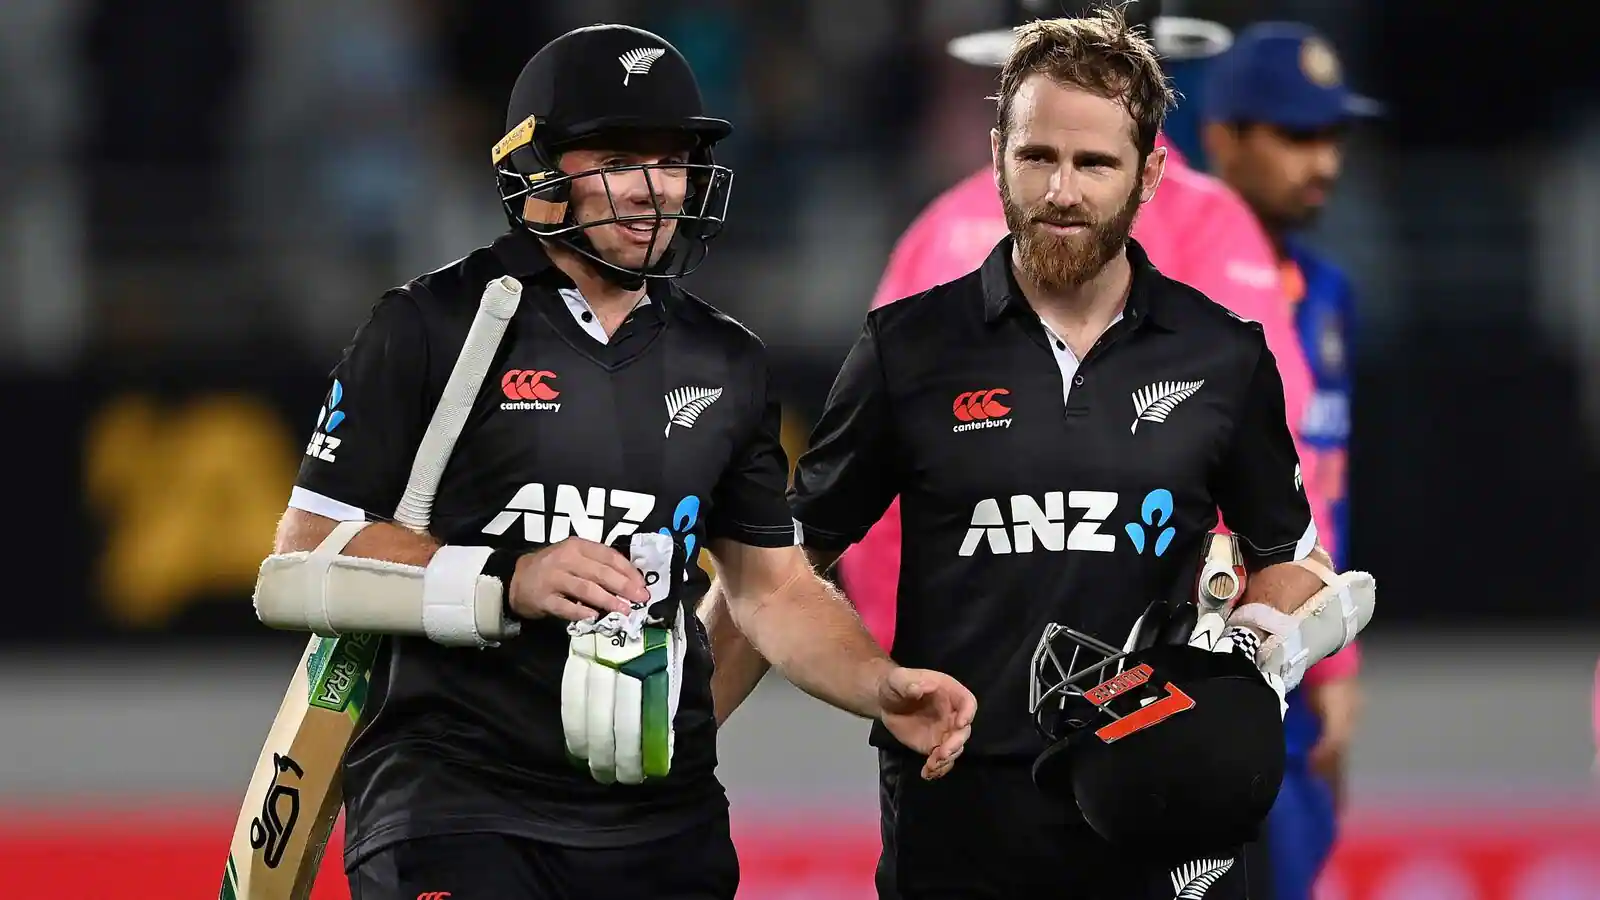 IND vs NZ 1st ODI: Tom Latham, and Kane Williamson Power New Zealand to win by 7 wickets against India